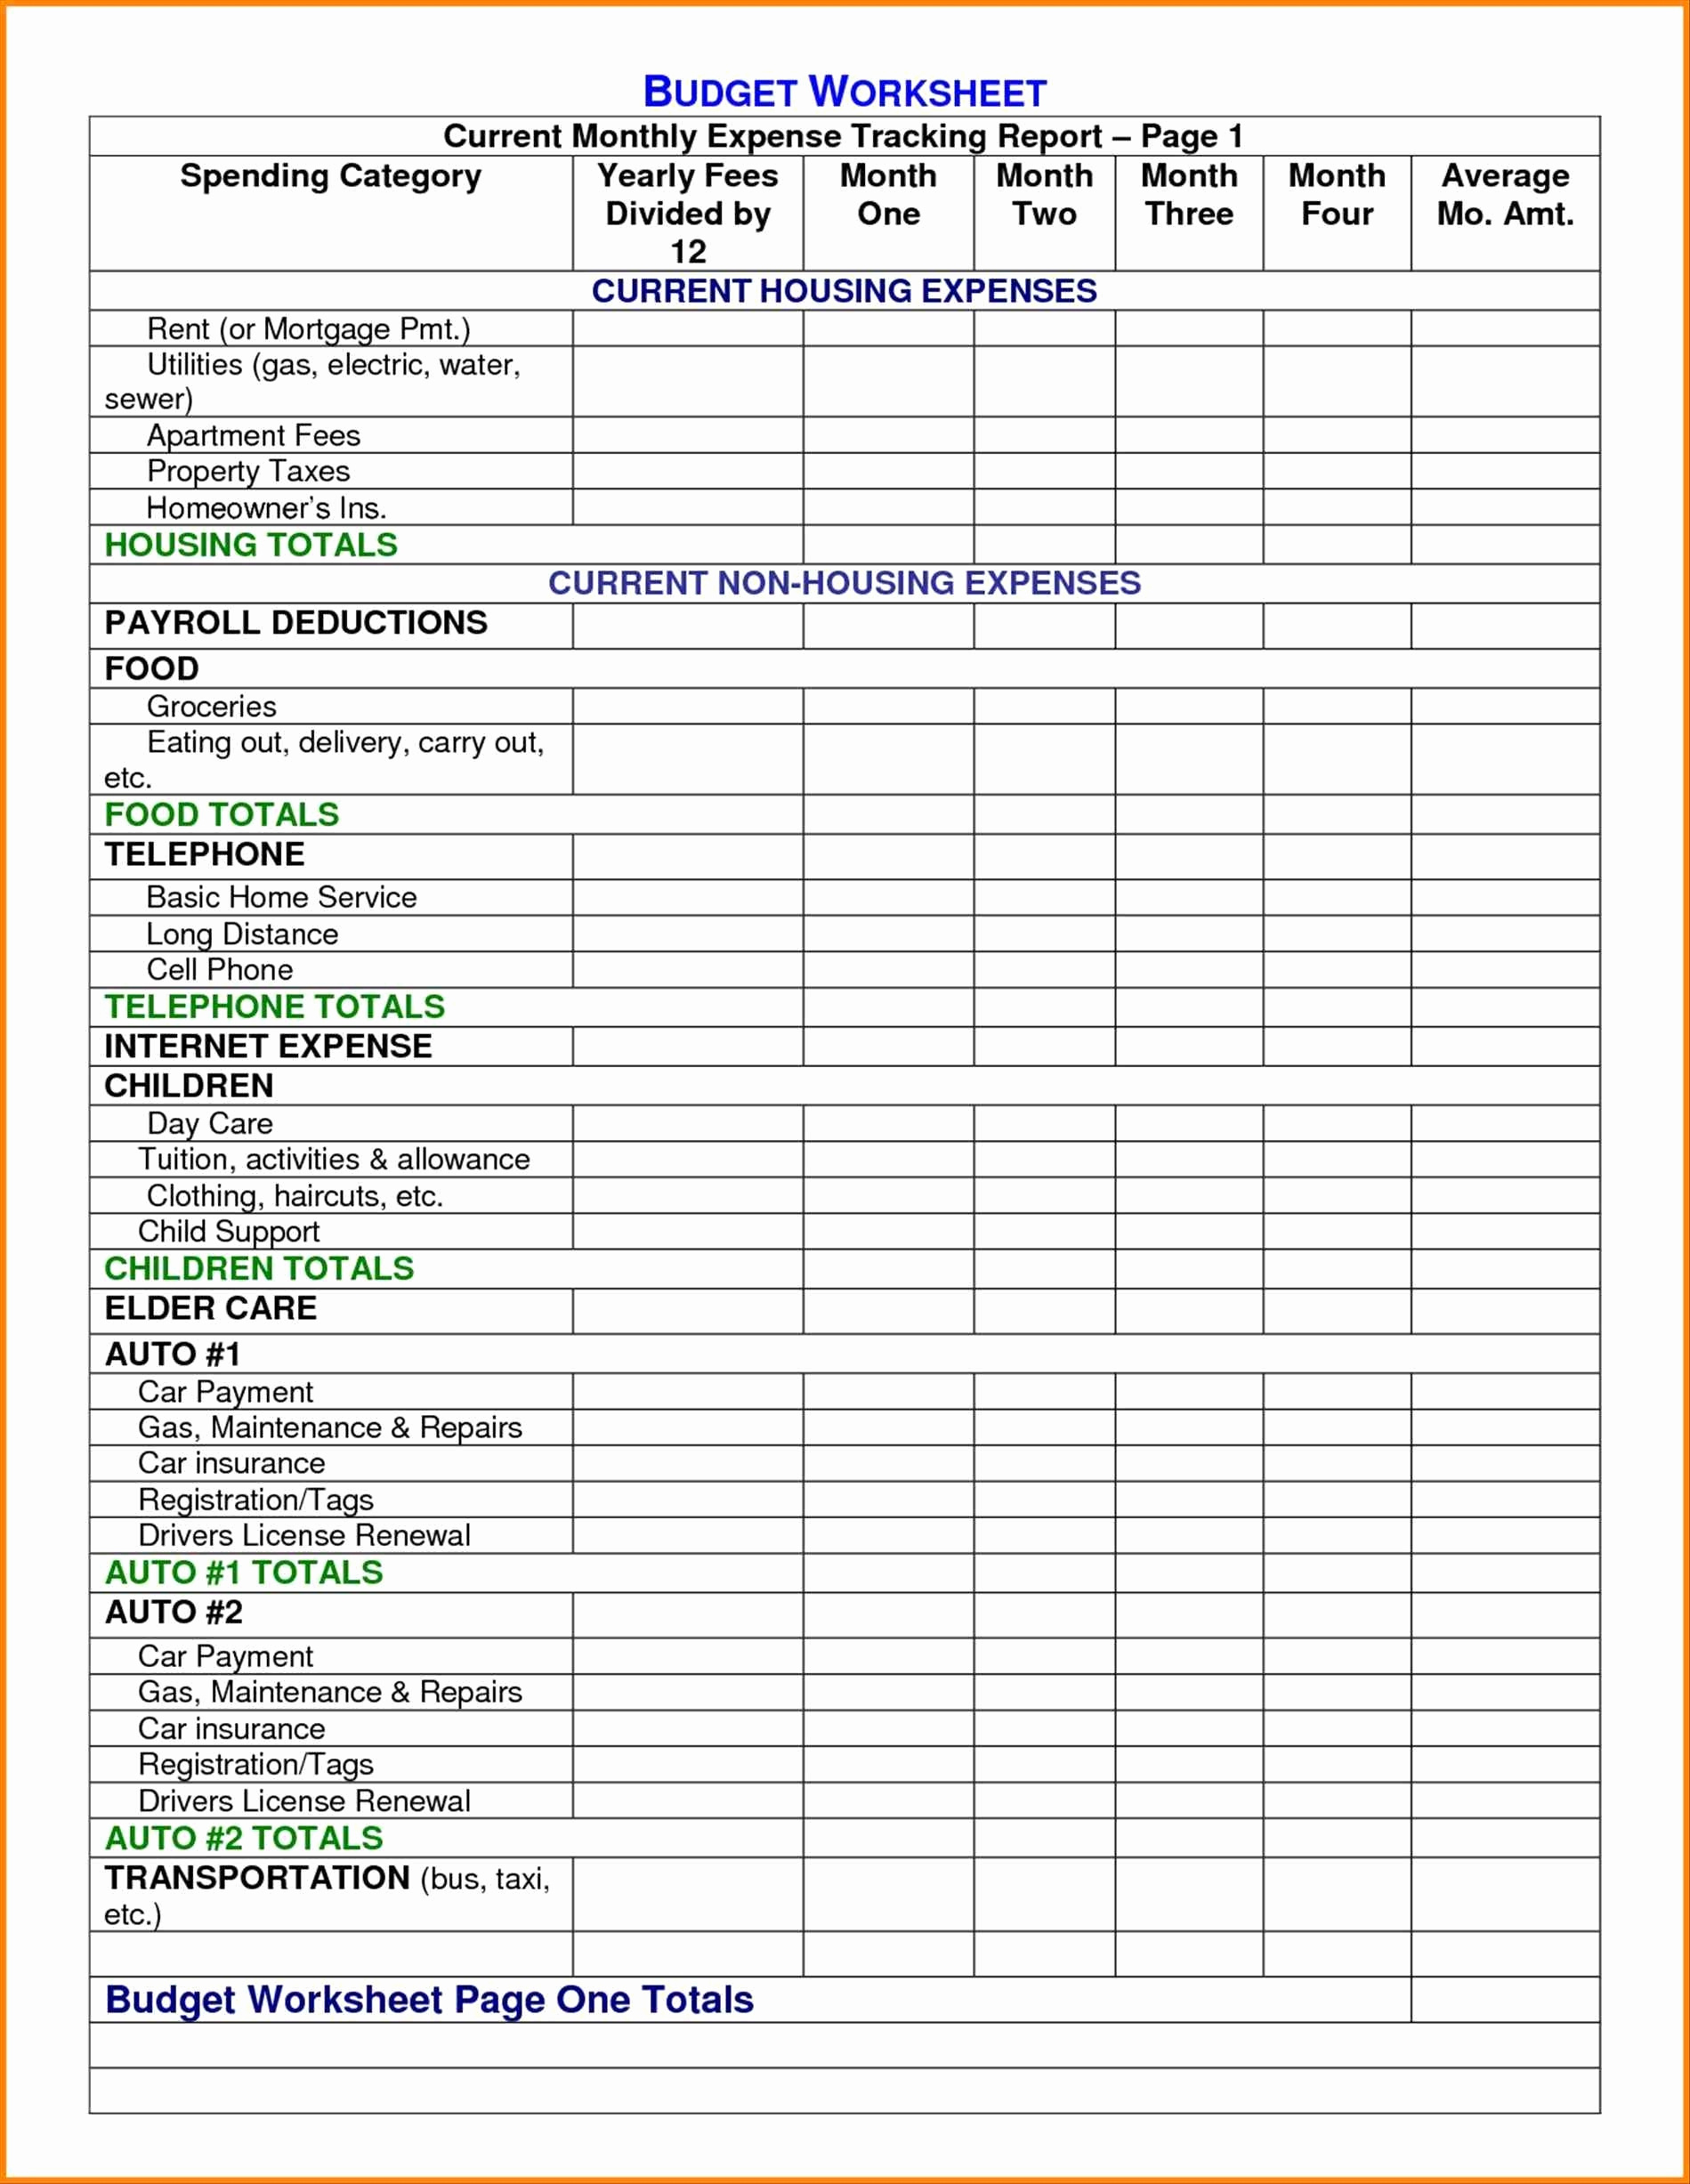 Uber Accounting Spreadsheet For Uber Driver Spreadsheet Awesome Free Salon Bookkeeping Spreadsheet